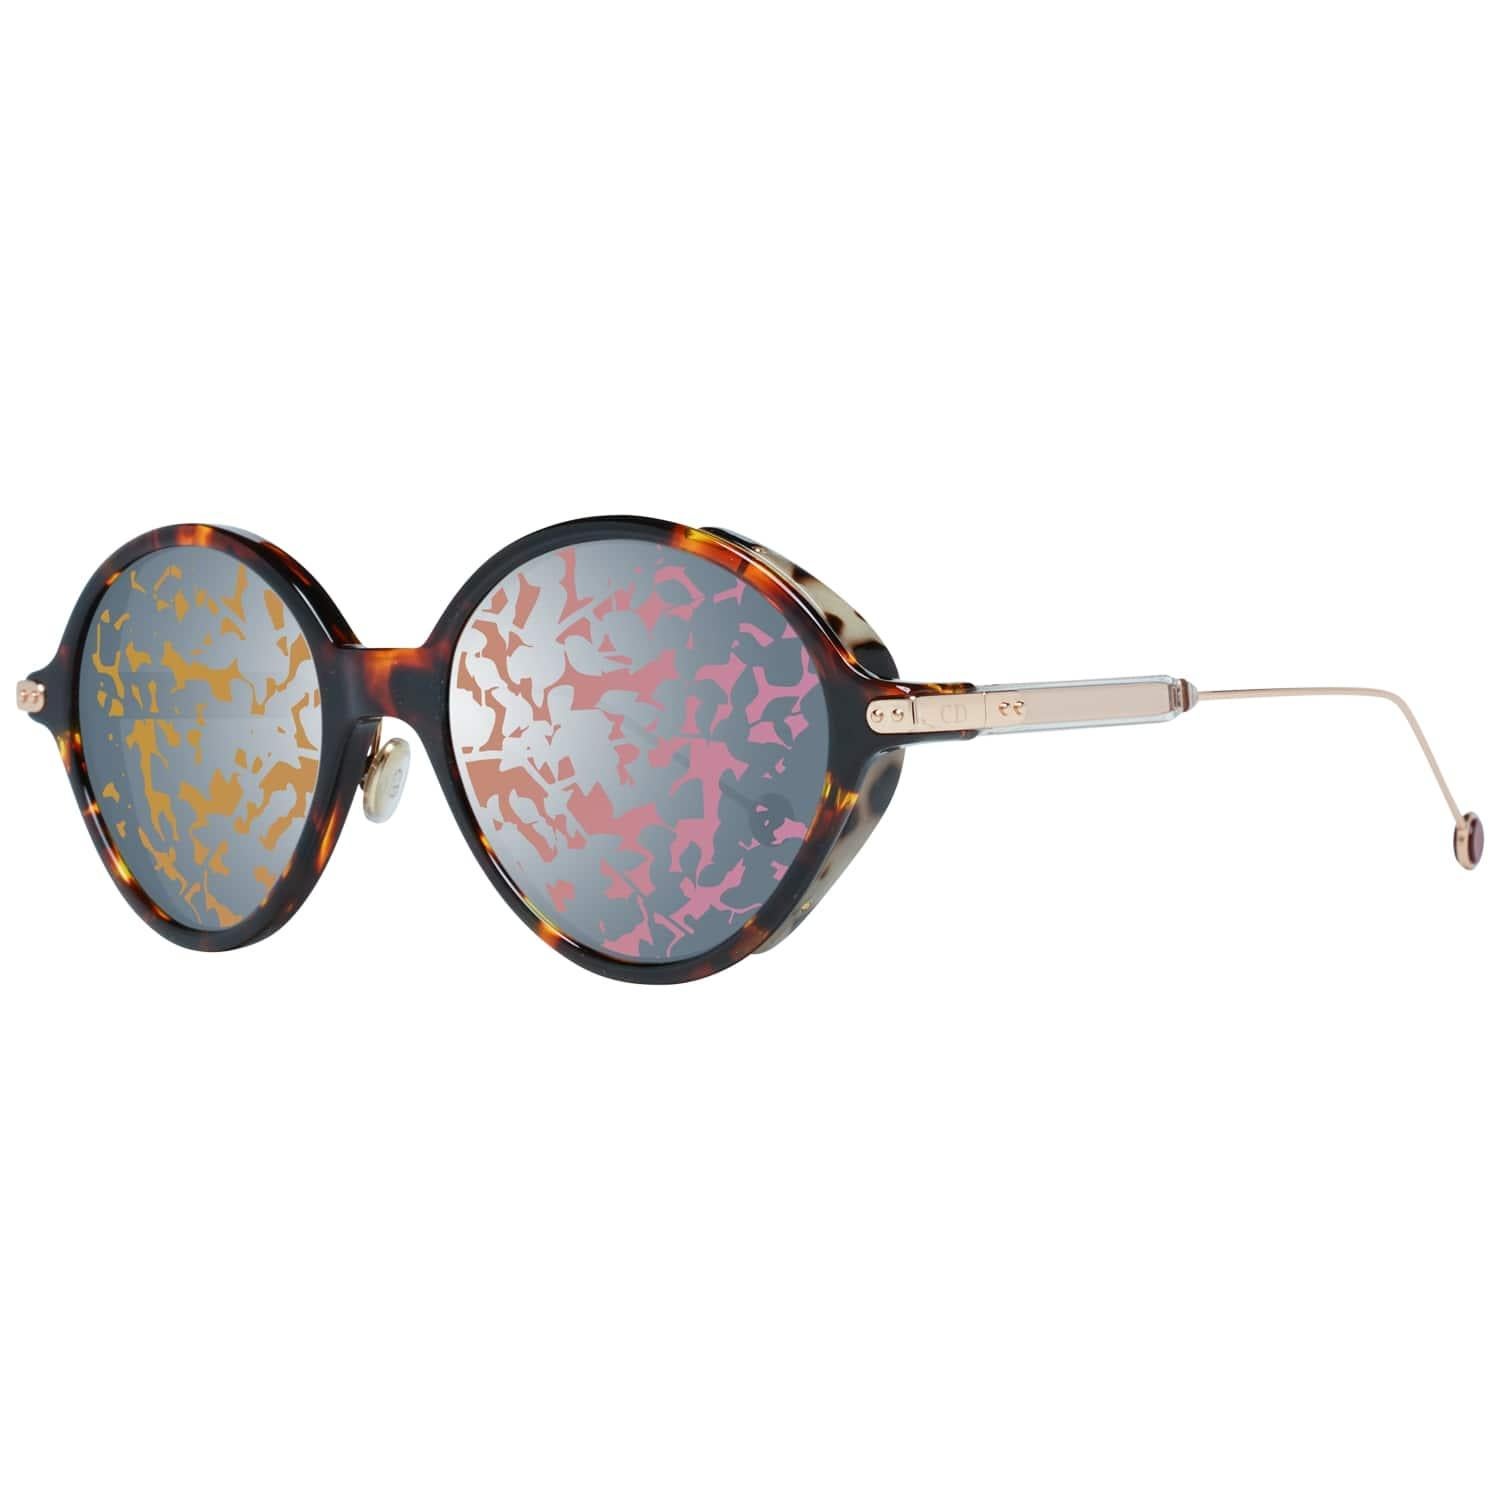 Details

MATERIAL: Metal

COLOR: Brown

MODEL: Diorumbrage 520X3

GENDER: Women

COUNTRY OF MANUFACTURE: Italy

TYPE: Sunglasses

ORIGINAL CASE?: Yes

STYLE: Oval

OCCASION: Casual

FEATURES: Lightweight

LENS COLOR: Pink

LENS TECHNOLOGY: